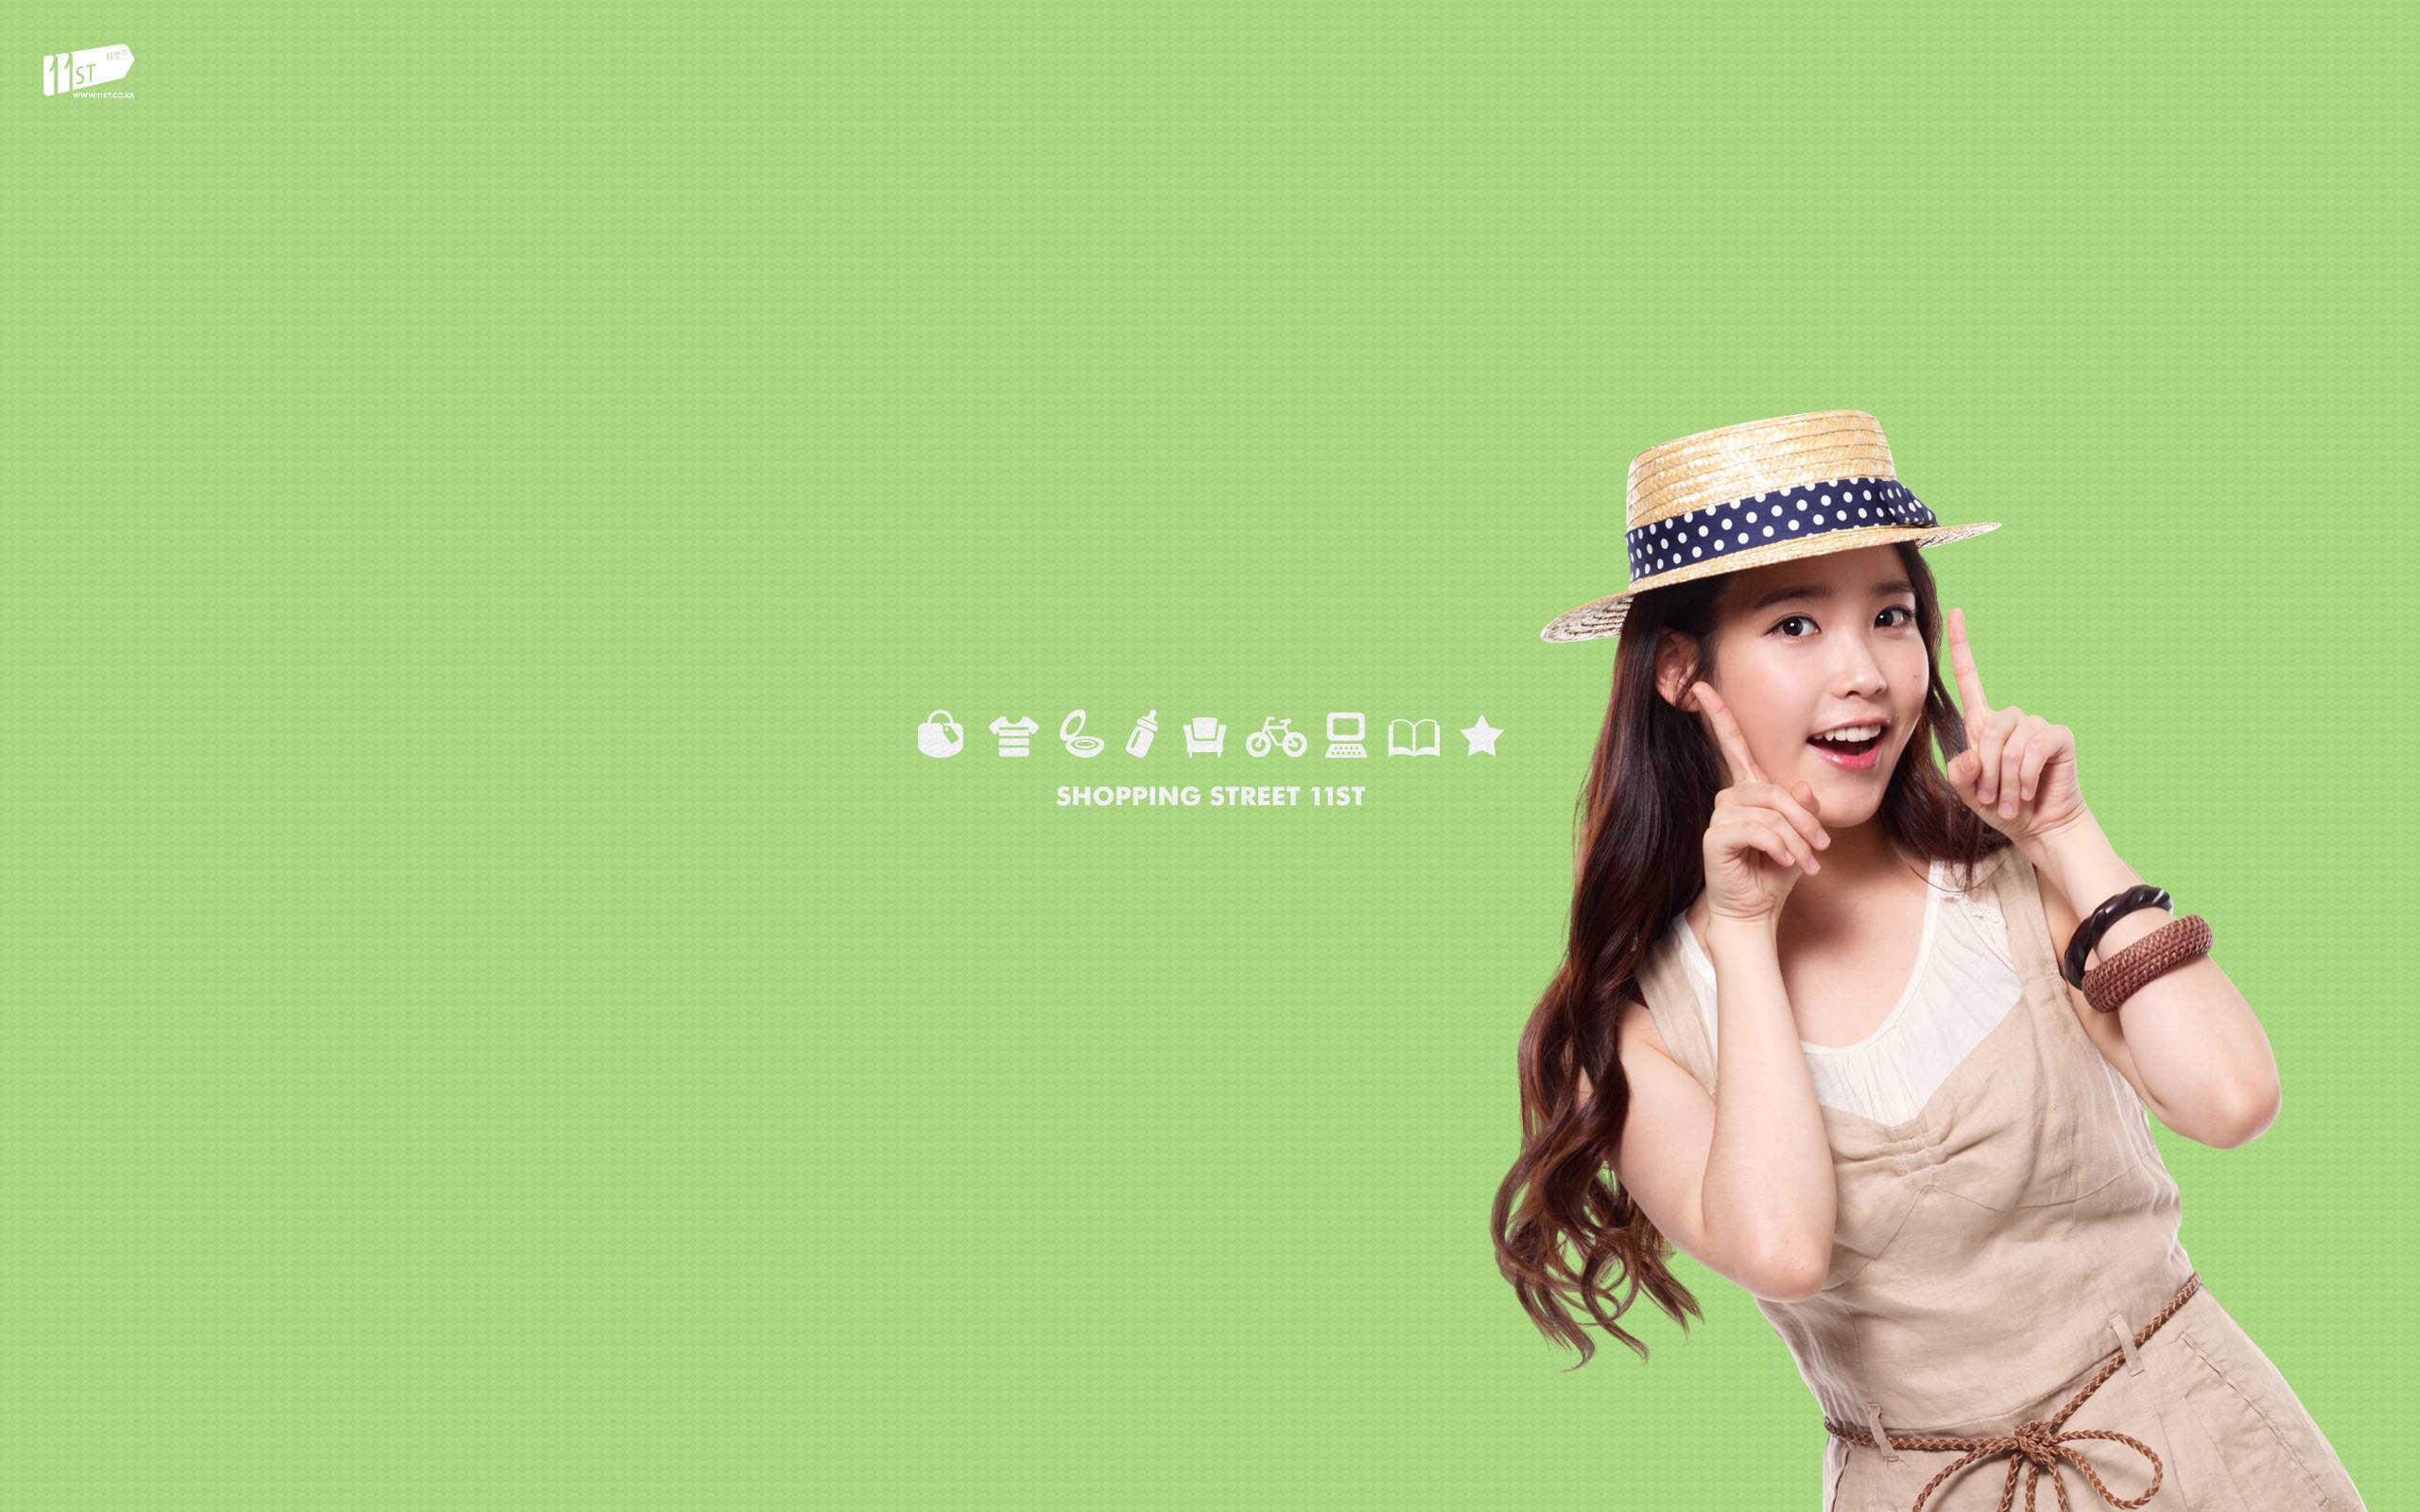 11ST Online Shopping Mall Wallpaper and Webcaps